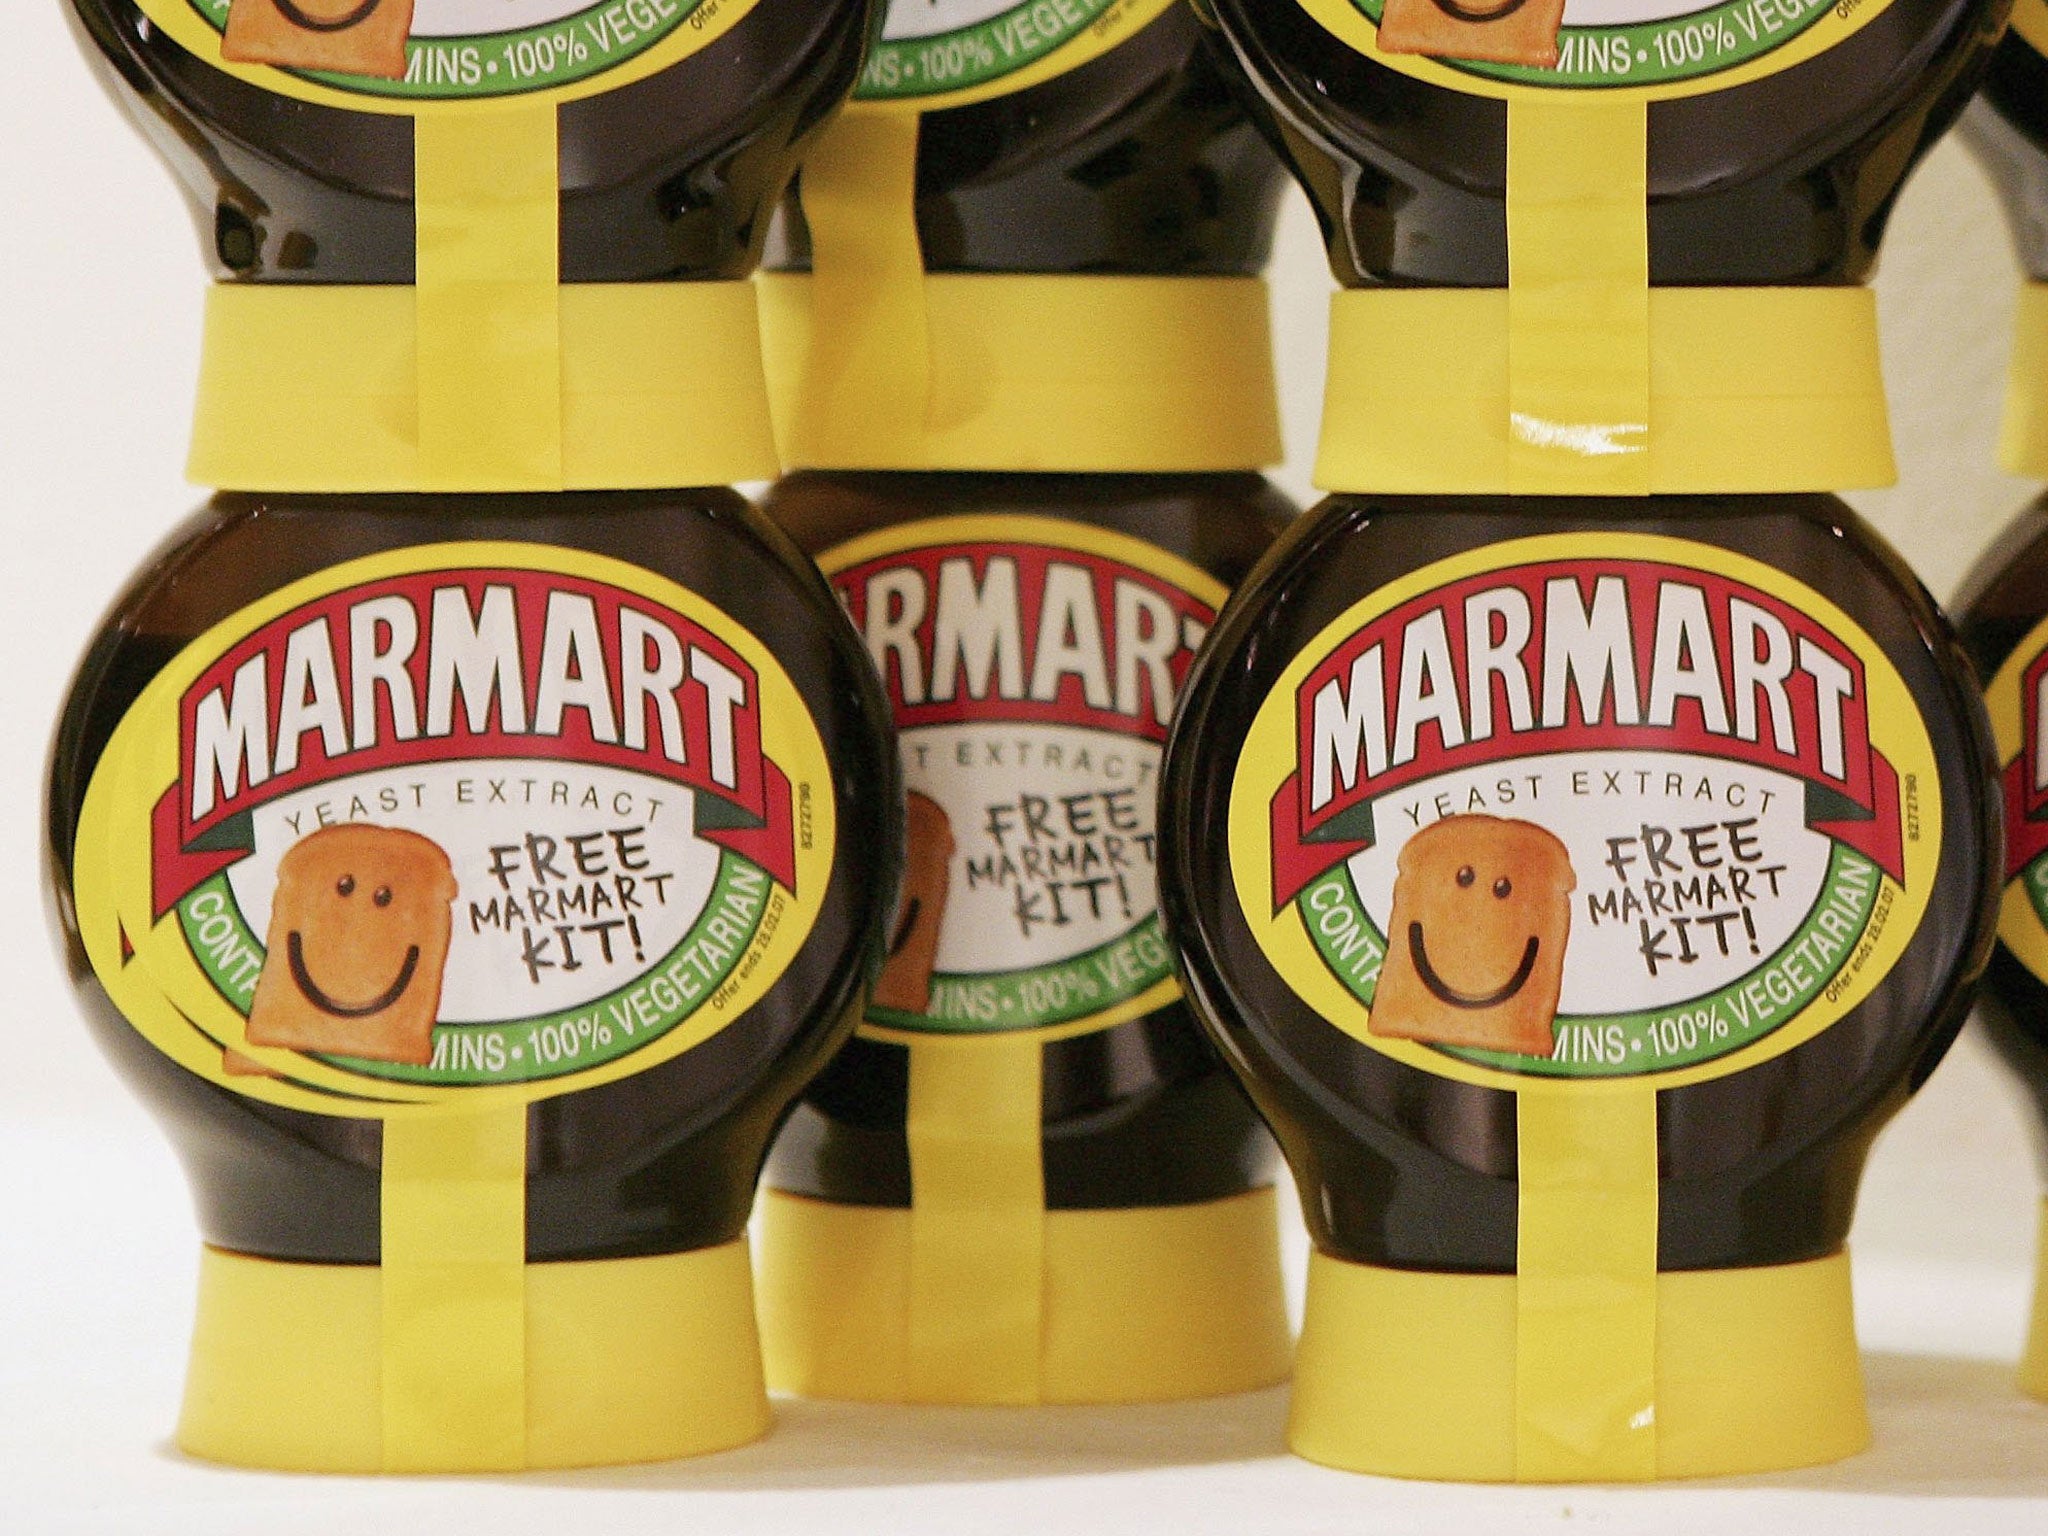 Marmite and Irn-Bru have been banned from supermarkets in Canada